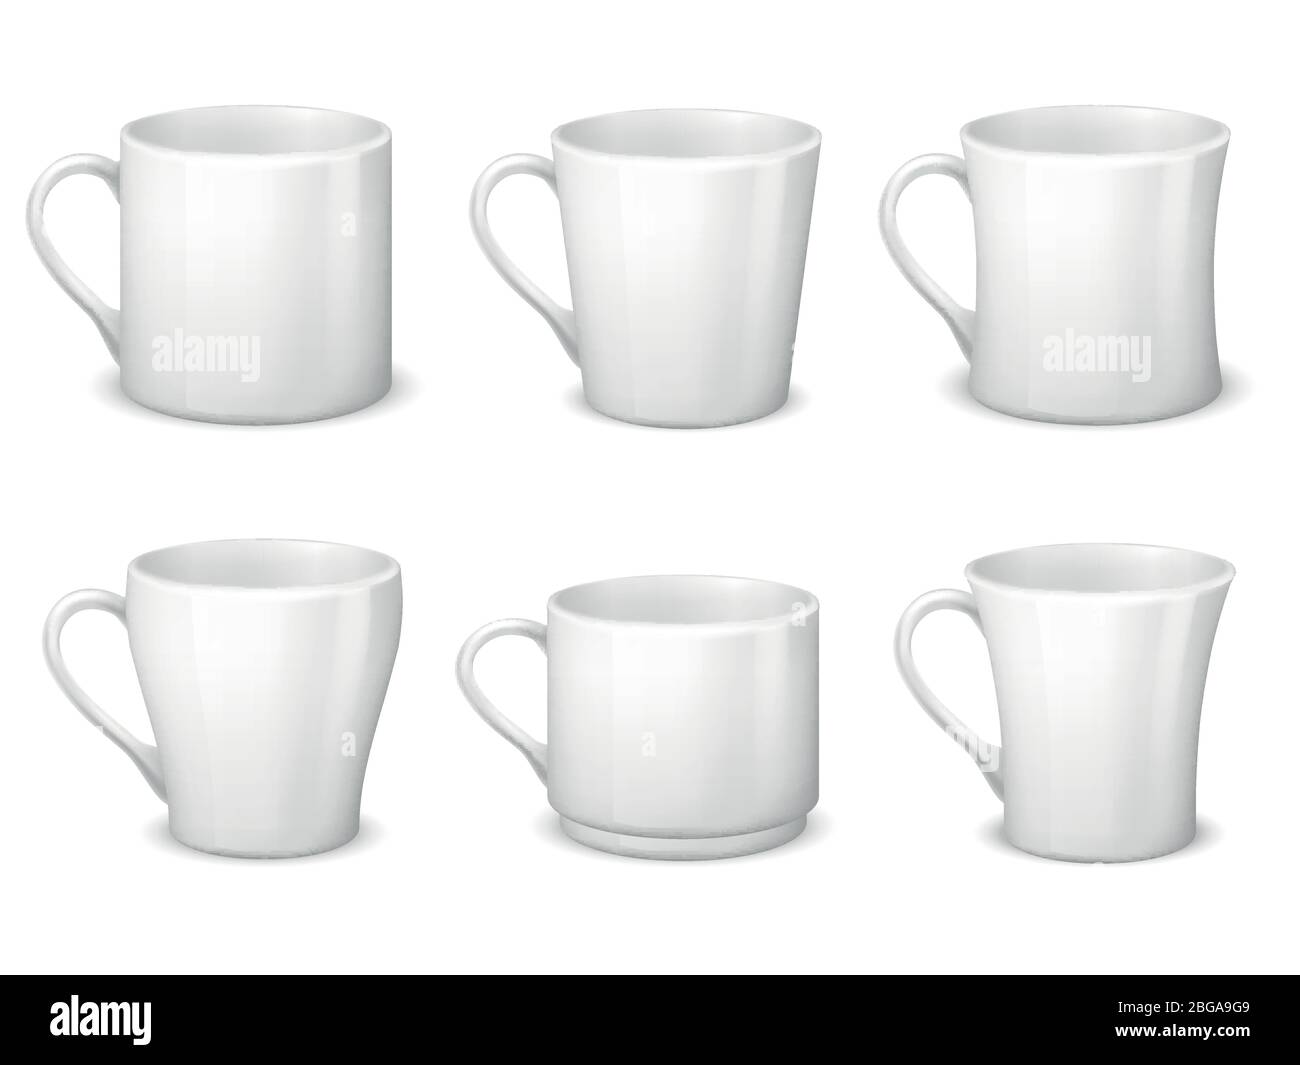 Realistic blank white coffee mugs with handle and porcelain cups vector template isolated. Cup porcelain for tea and coffee breakfast, realistic teacup illustration Stock Vector